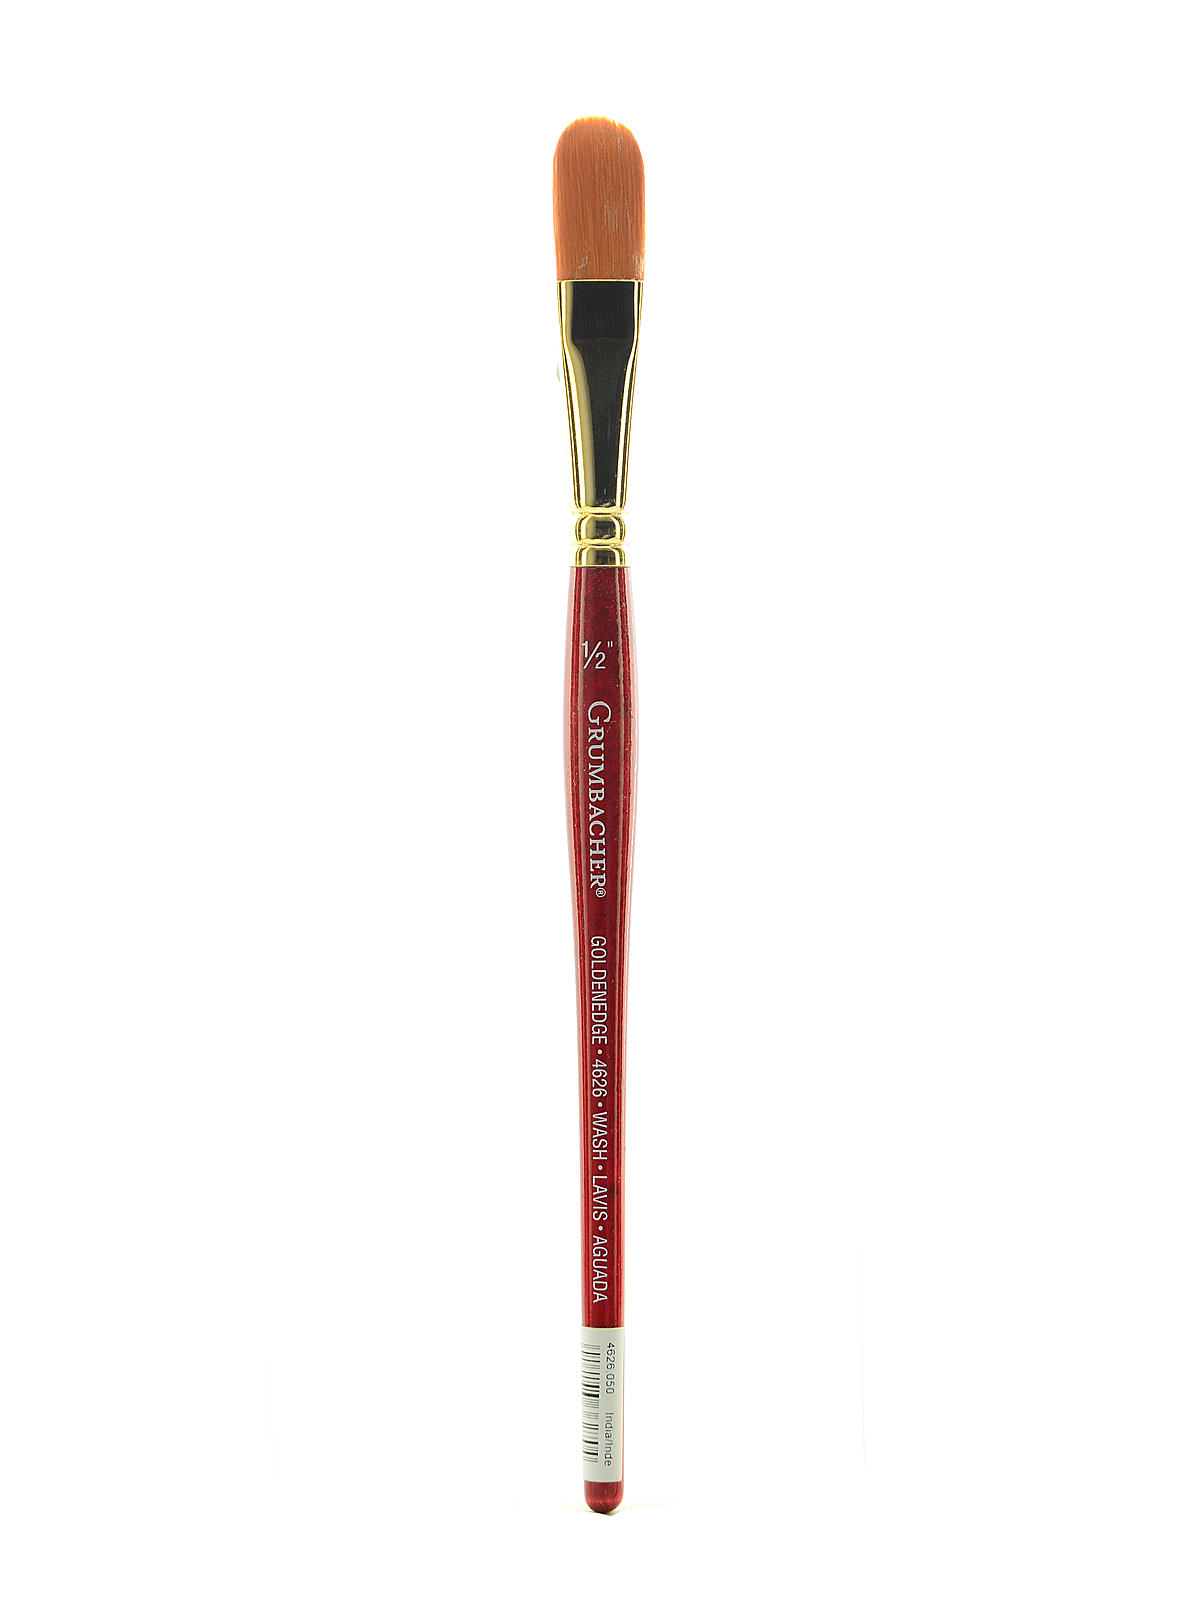 Goldenedge Watercolor Brushes 1 2 In. Oval Wash